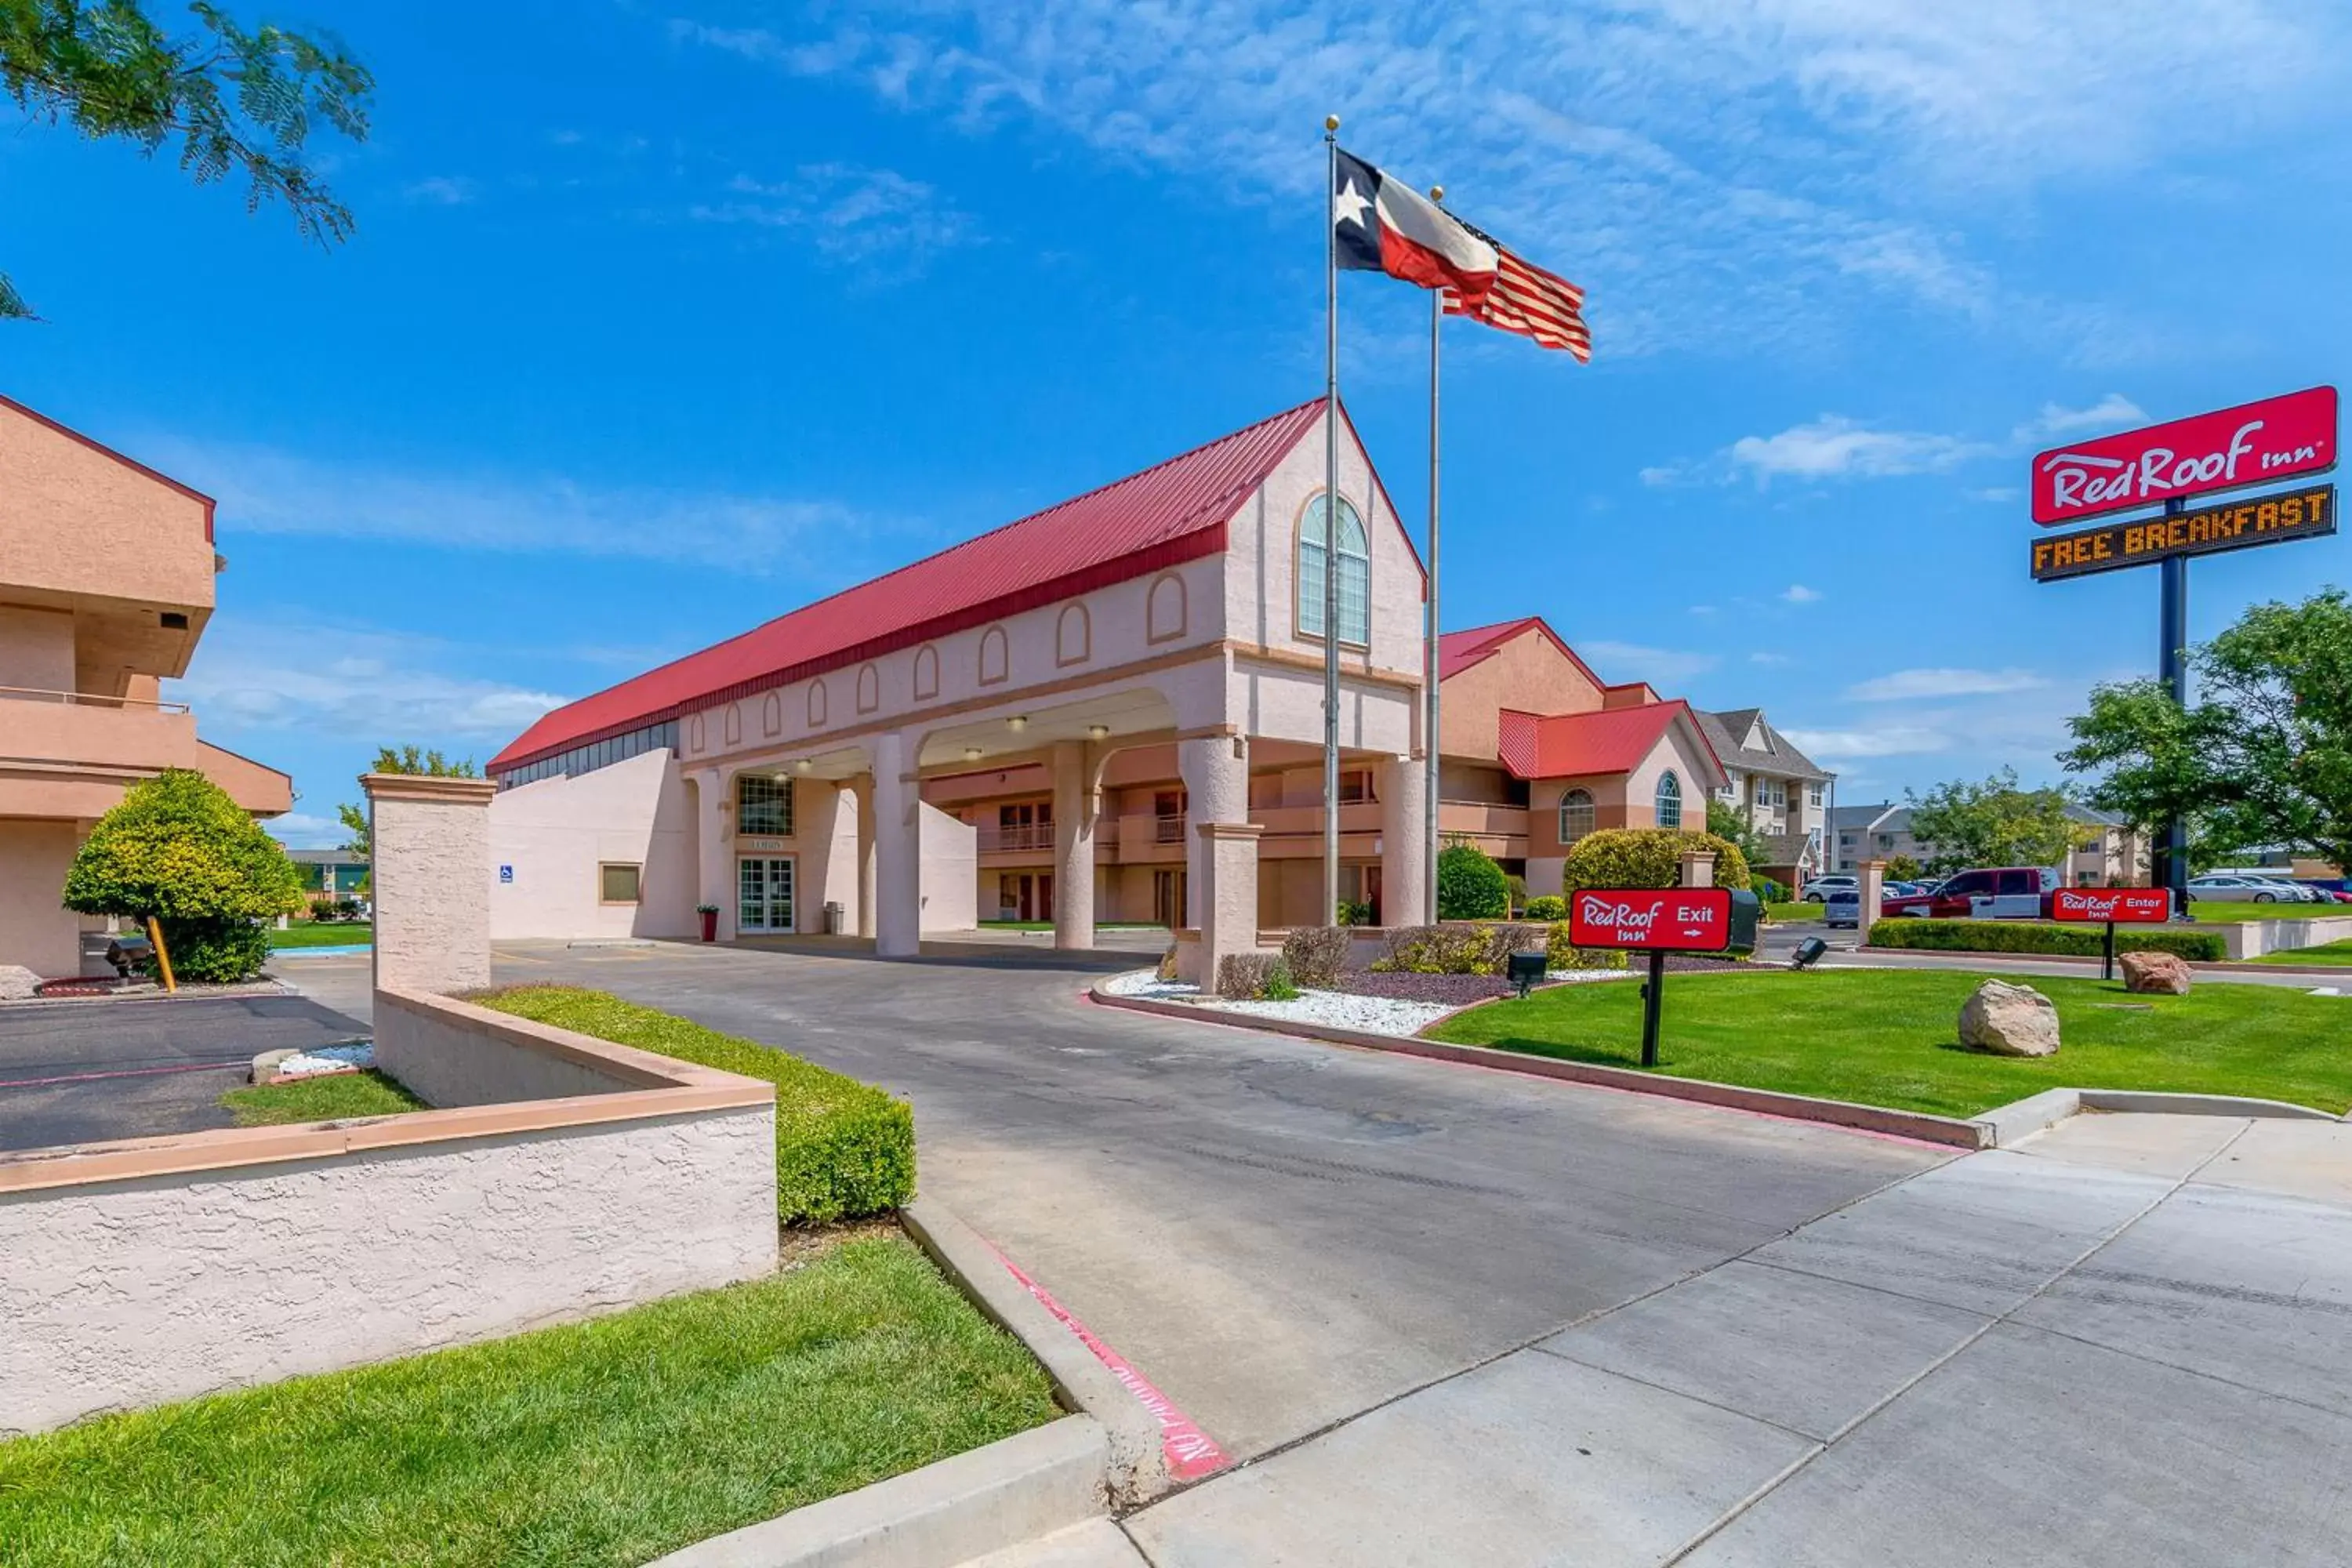 Property Building in Red Roof Inn Amarillo West